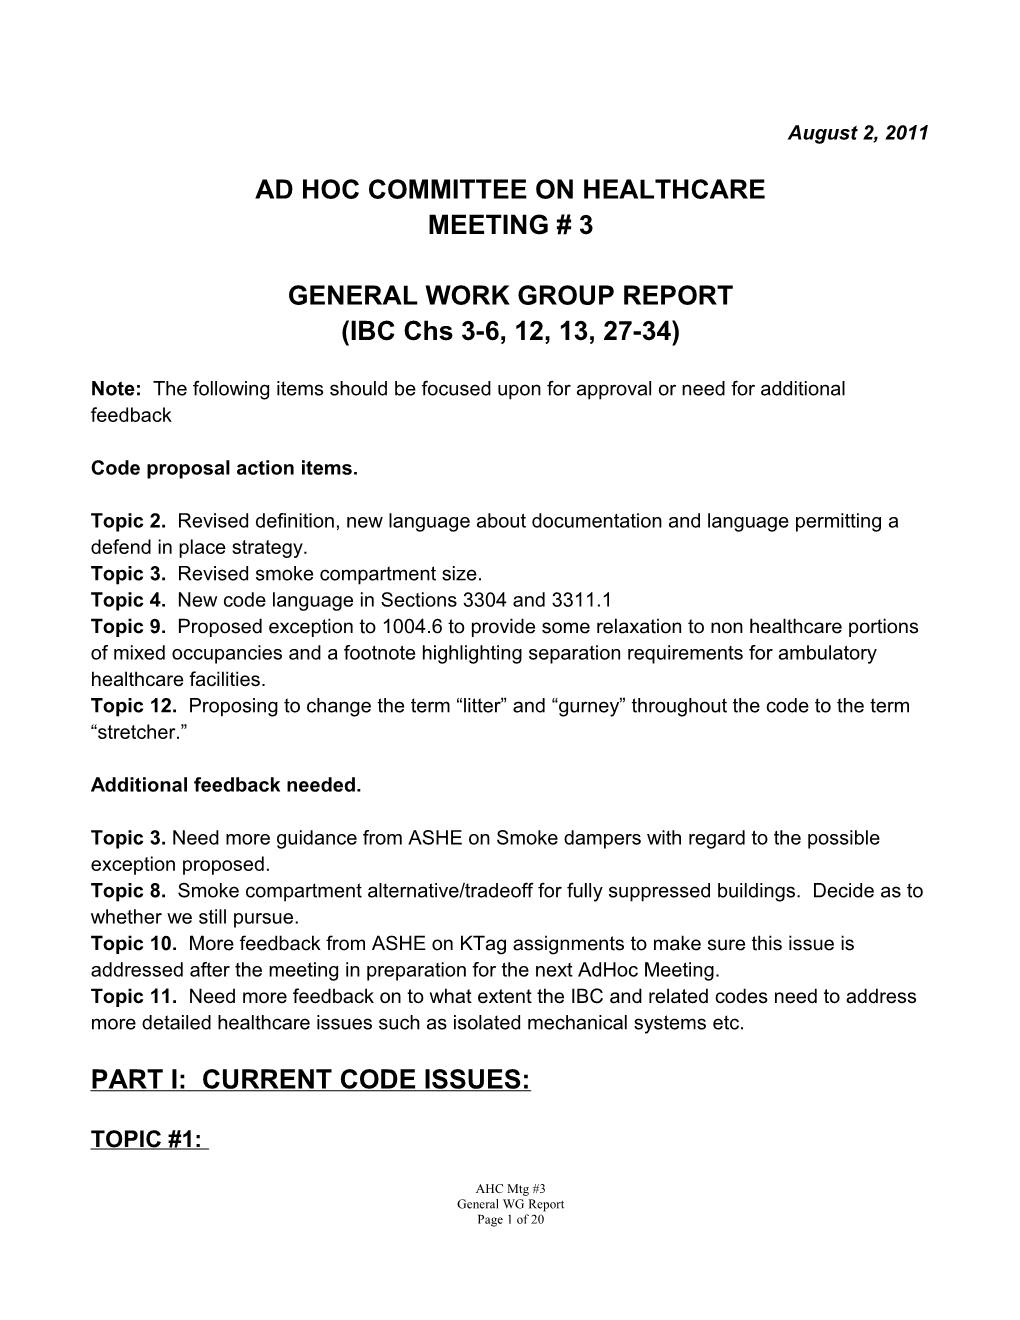 Ad Hoc Committee on Healthcare Meeting # 3: General Work Group Report (IBC Chs 3-6, 12